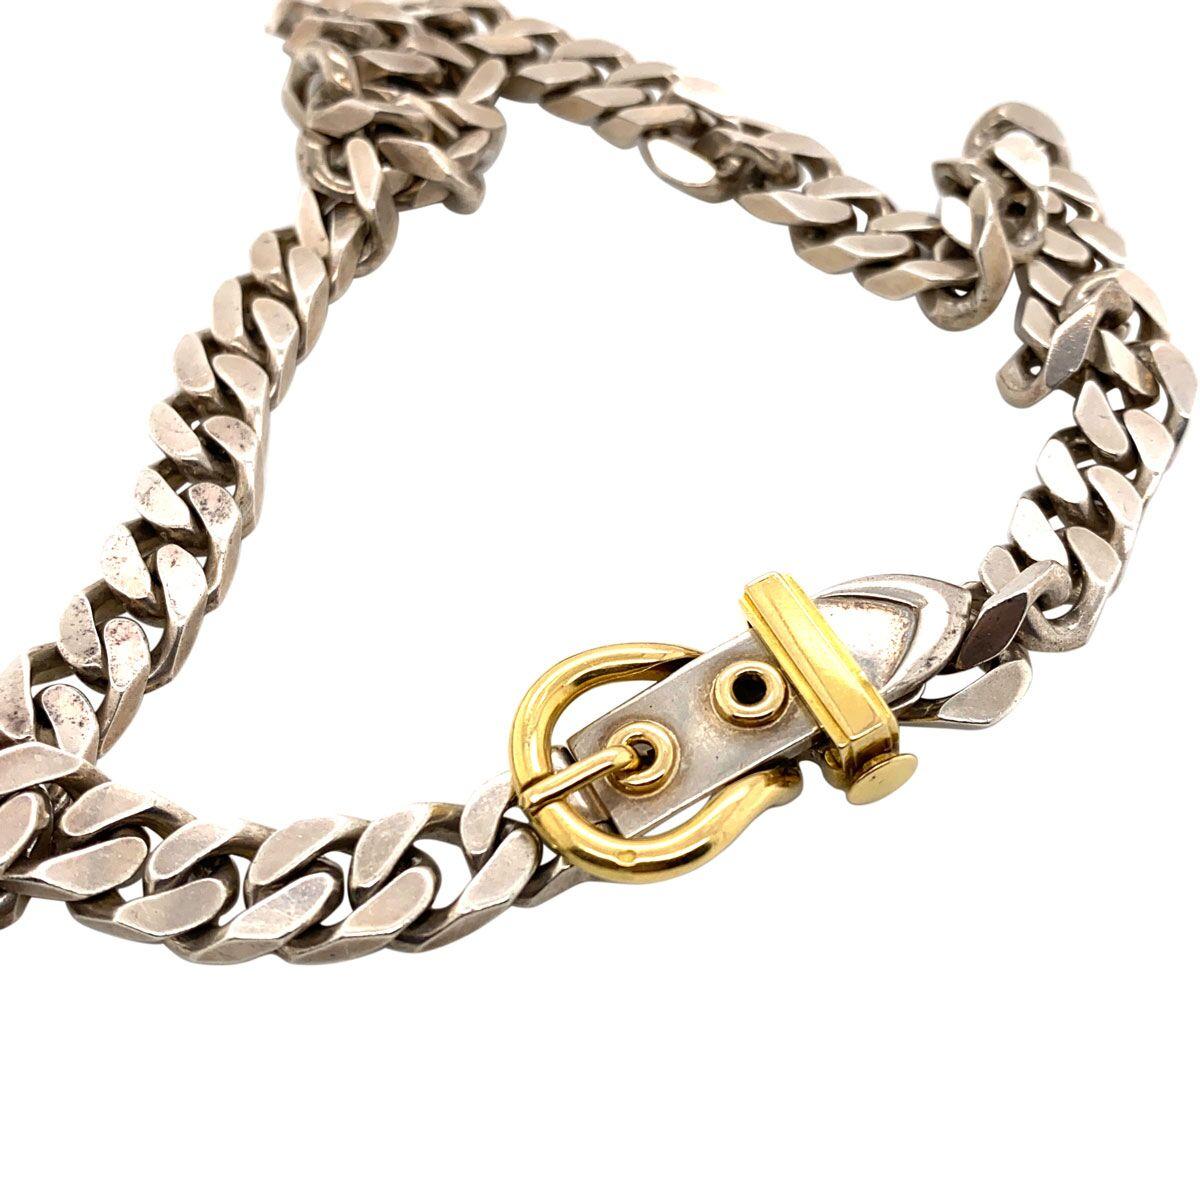 Women's or Men's Hermes Paris Sterling Silver and 18 Karat Yellow Gold Curb Link Chain Necklace